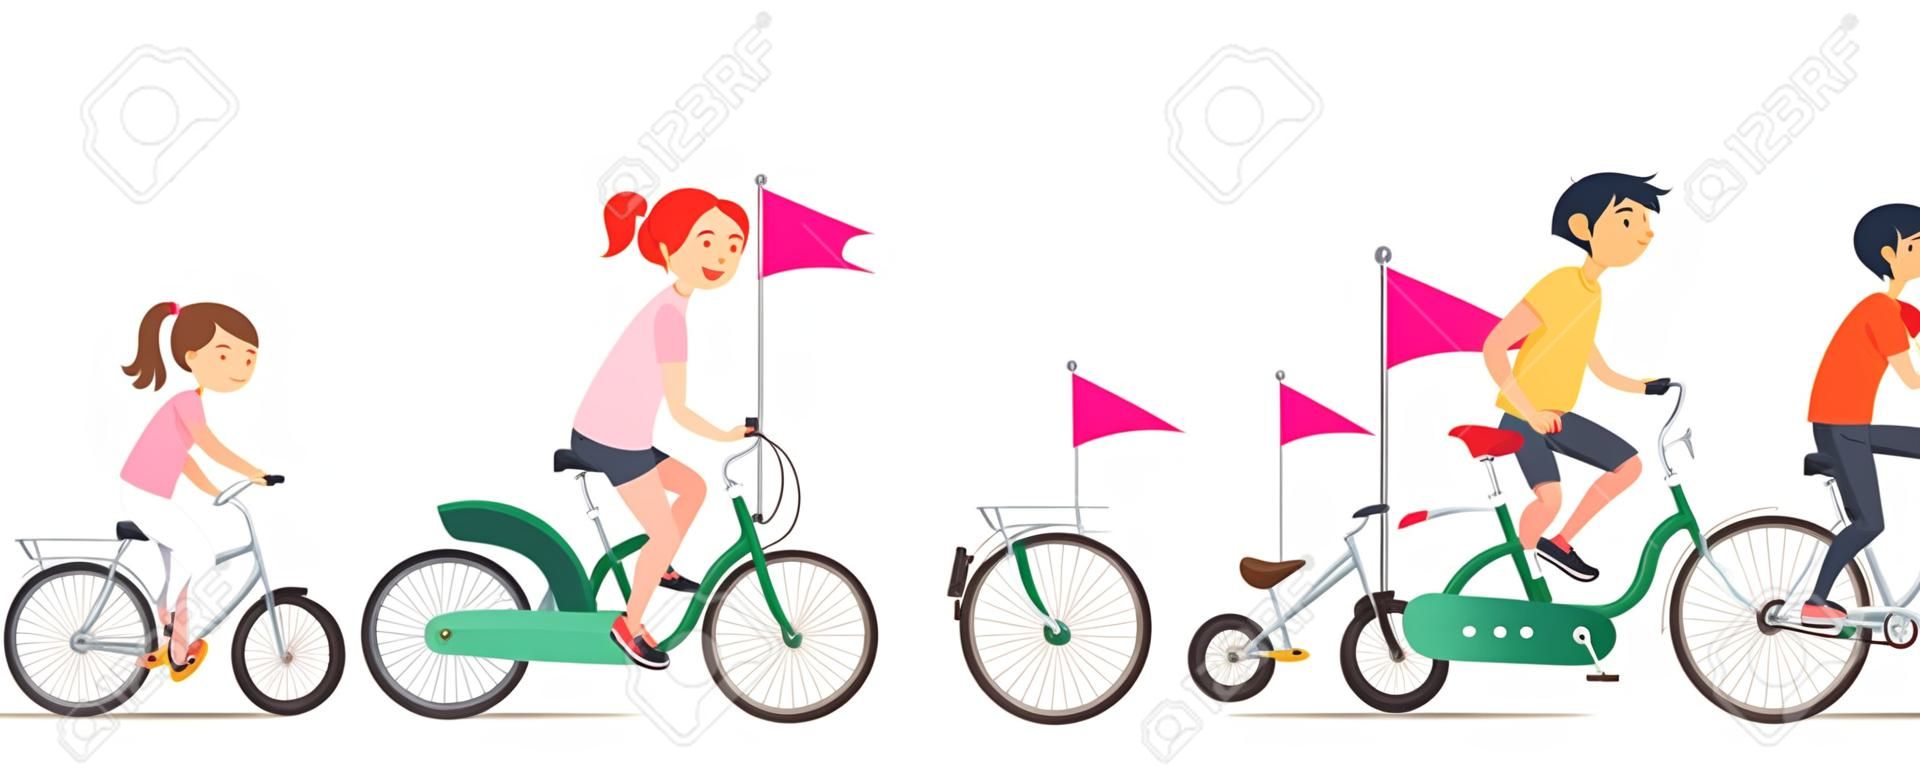 Family on bicycles walk. Male and female riding on bike